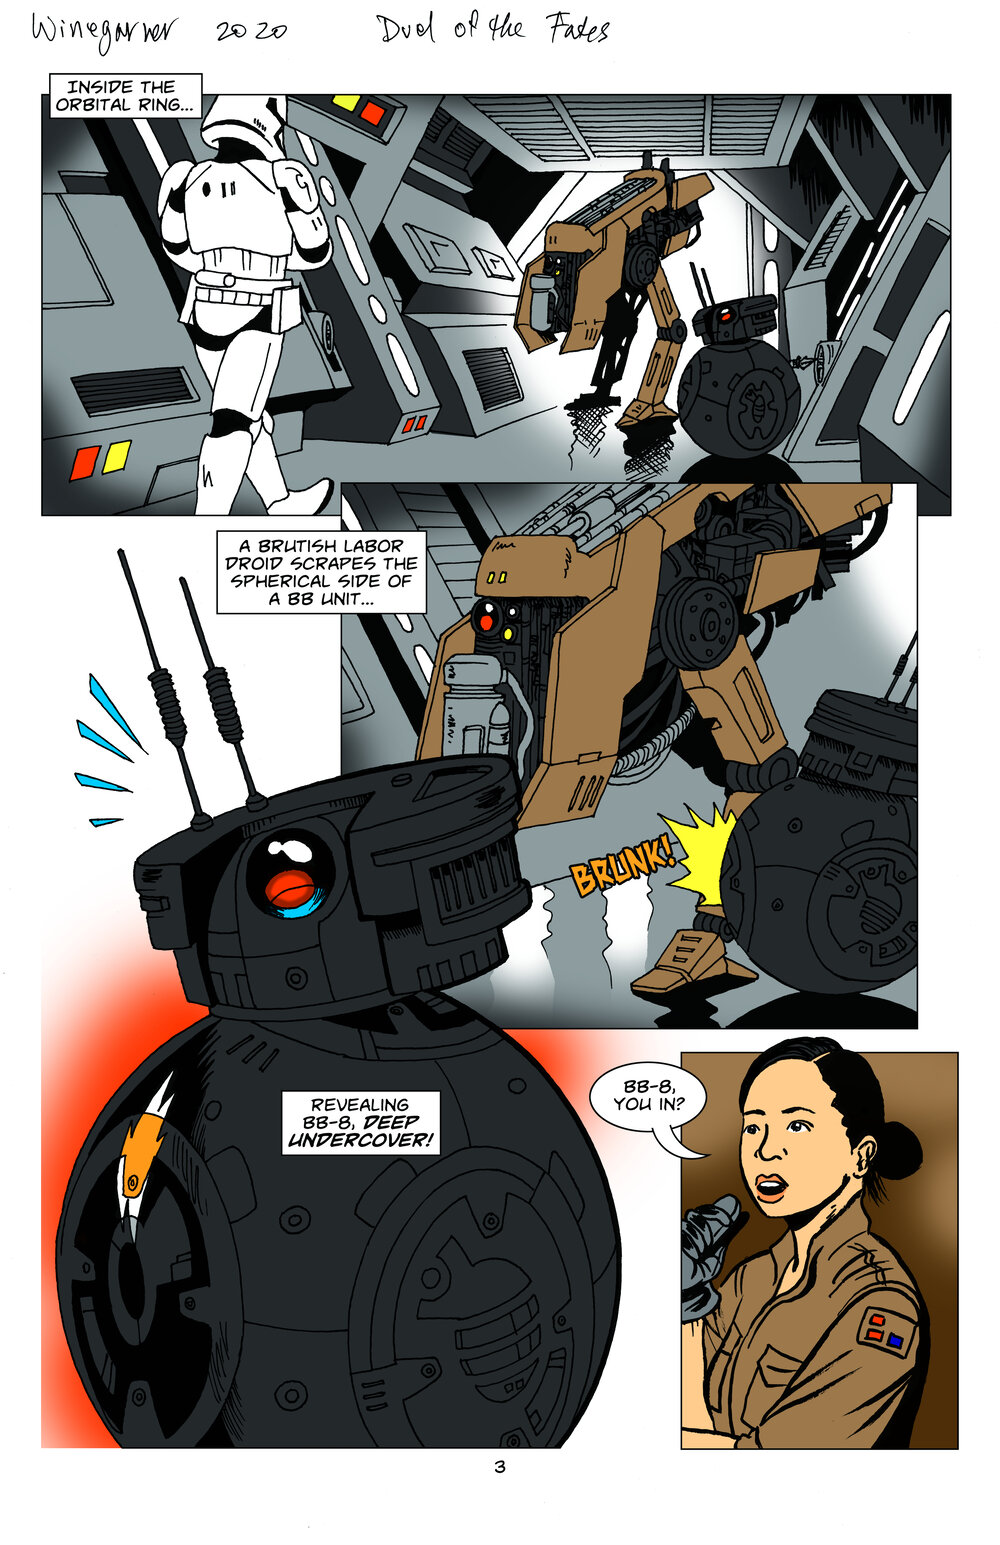 Star Wars: Duel of the Fates (2020-2021): Chapter 1 - Page 4